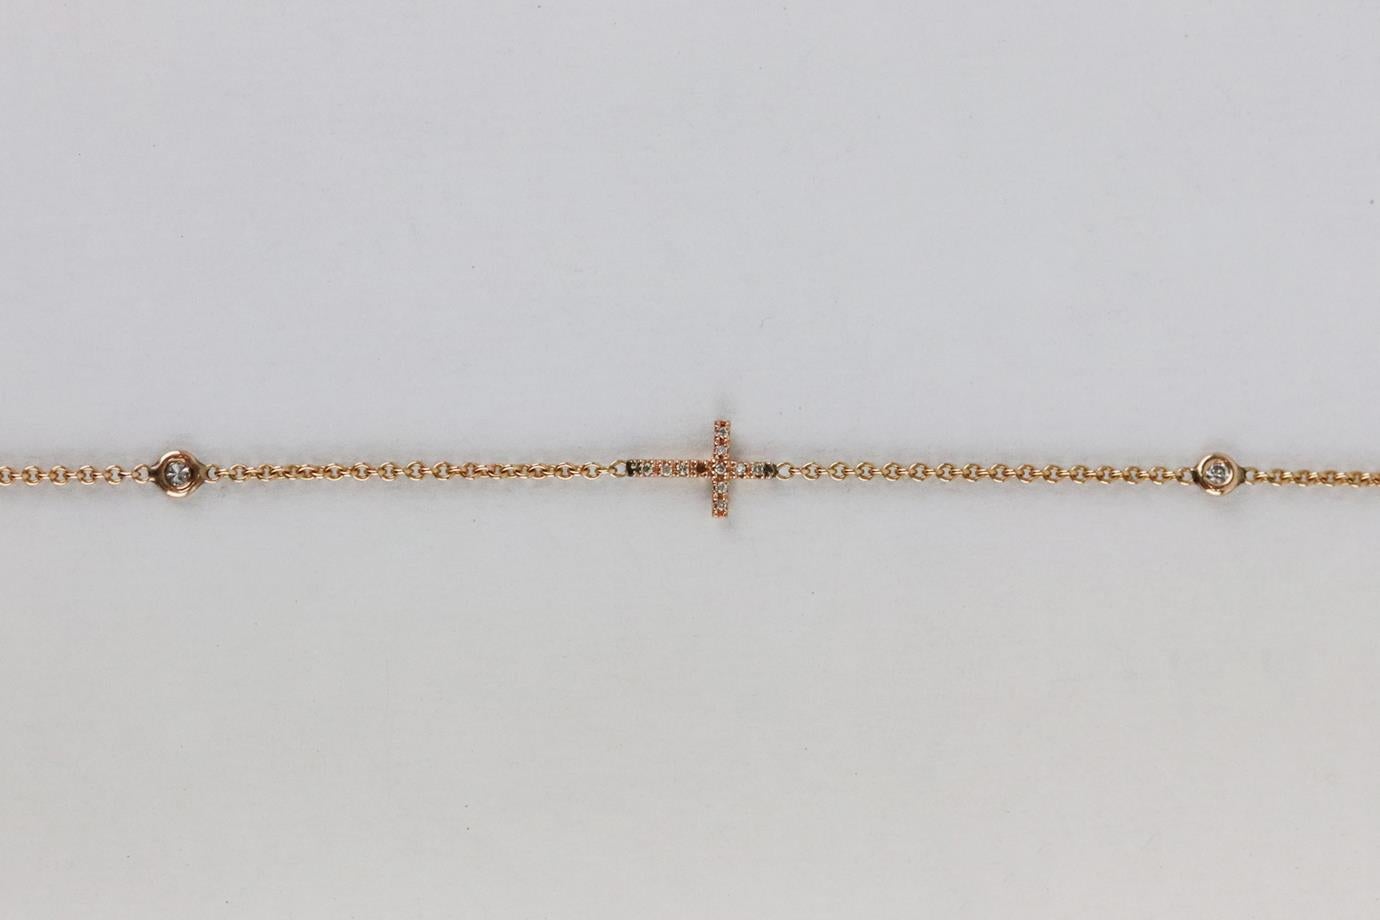 Jacquie Aiche Cross 14k rose gold 4 diamond anklet. Made from rose-gold with pave-diamond cross pendant, 4 brilliant cut diamonds and small chain. Rose-gold. Lobster clasp fastening at back. Does not come with box or dustbag. Min. Chain Length: 9.4